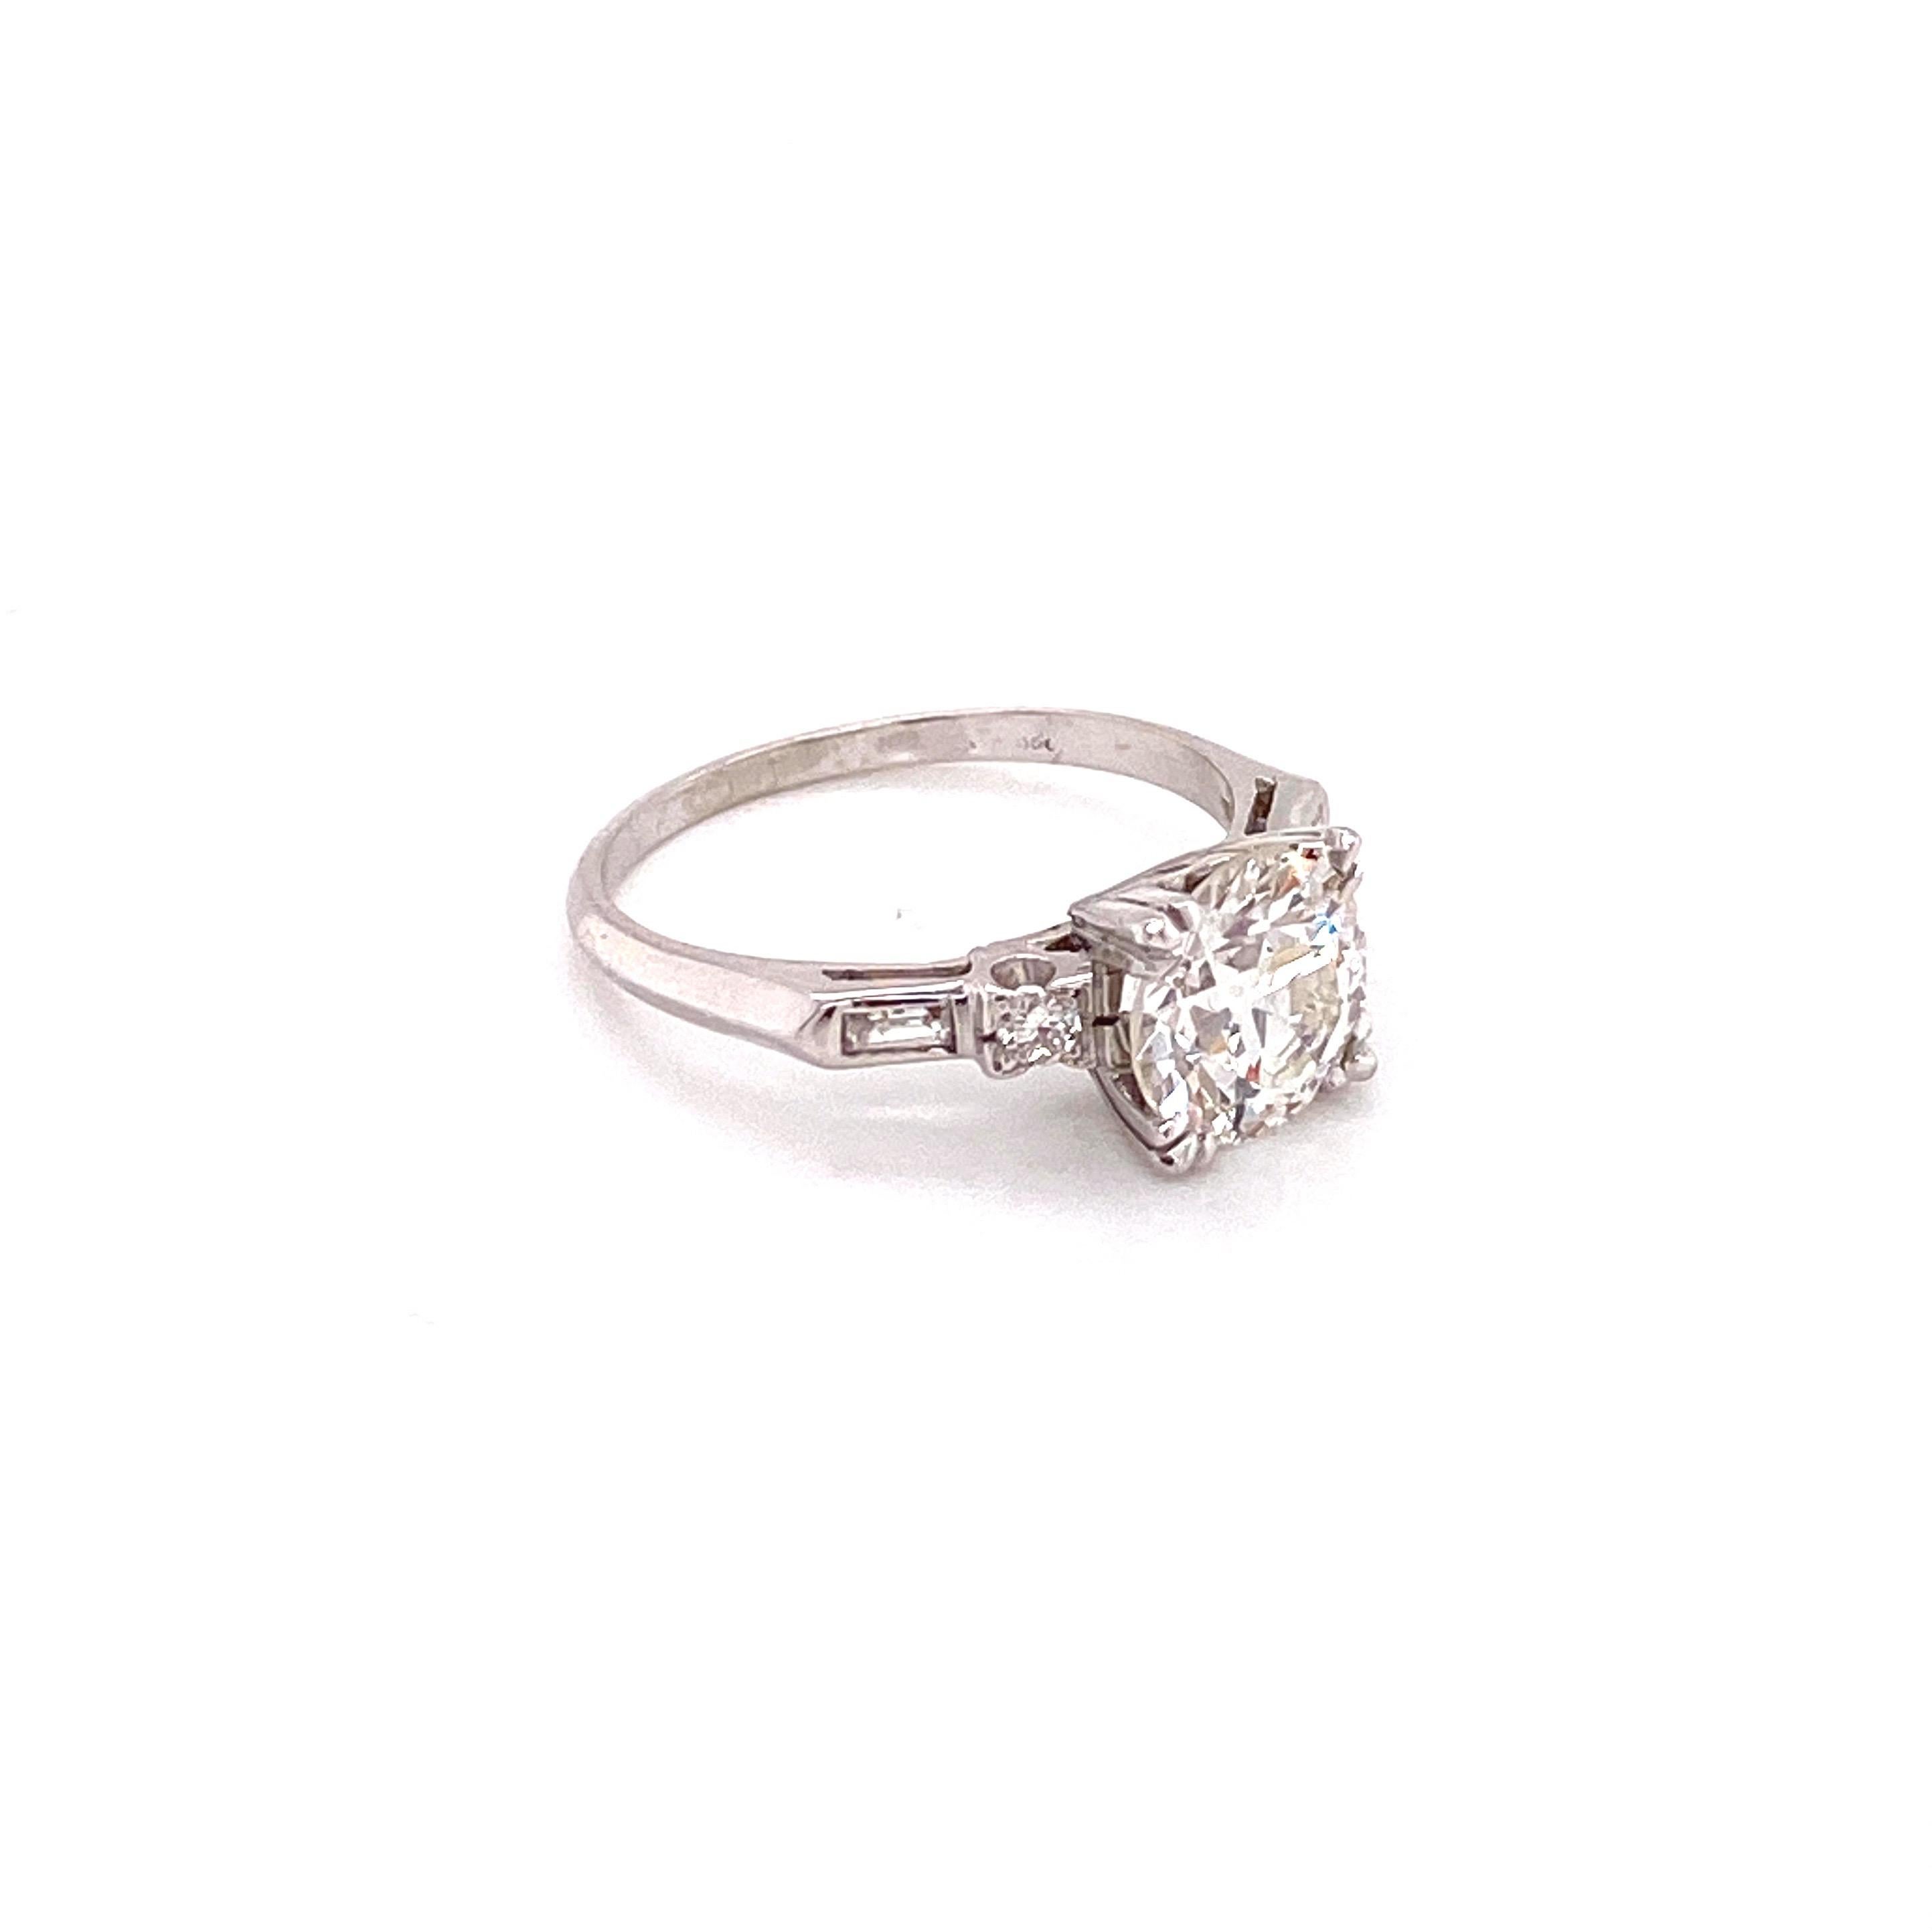 A quintessential jewel from a celebrated era, this breathtaking vintage engagement ring dates back to the iconic 1950s. The show-stopping centerpiece is a magnificent 1.90 carat European cut diamond, exhibiting a warm antique I color and exceptional